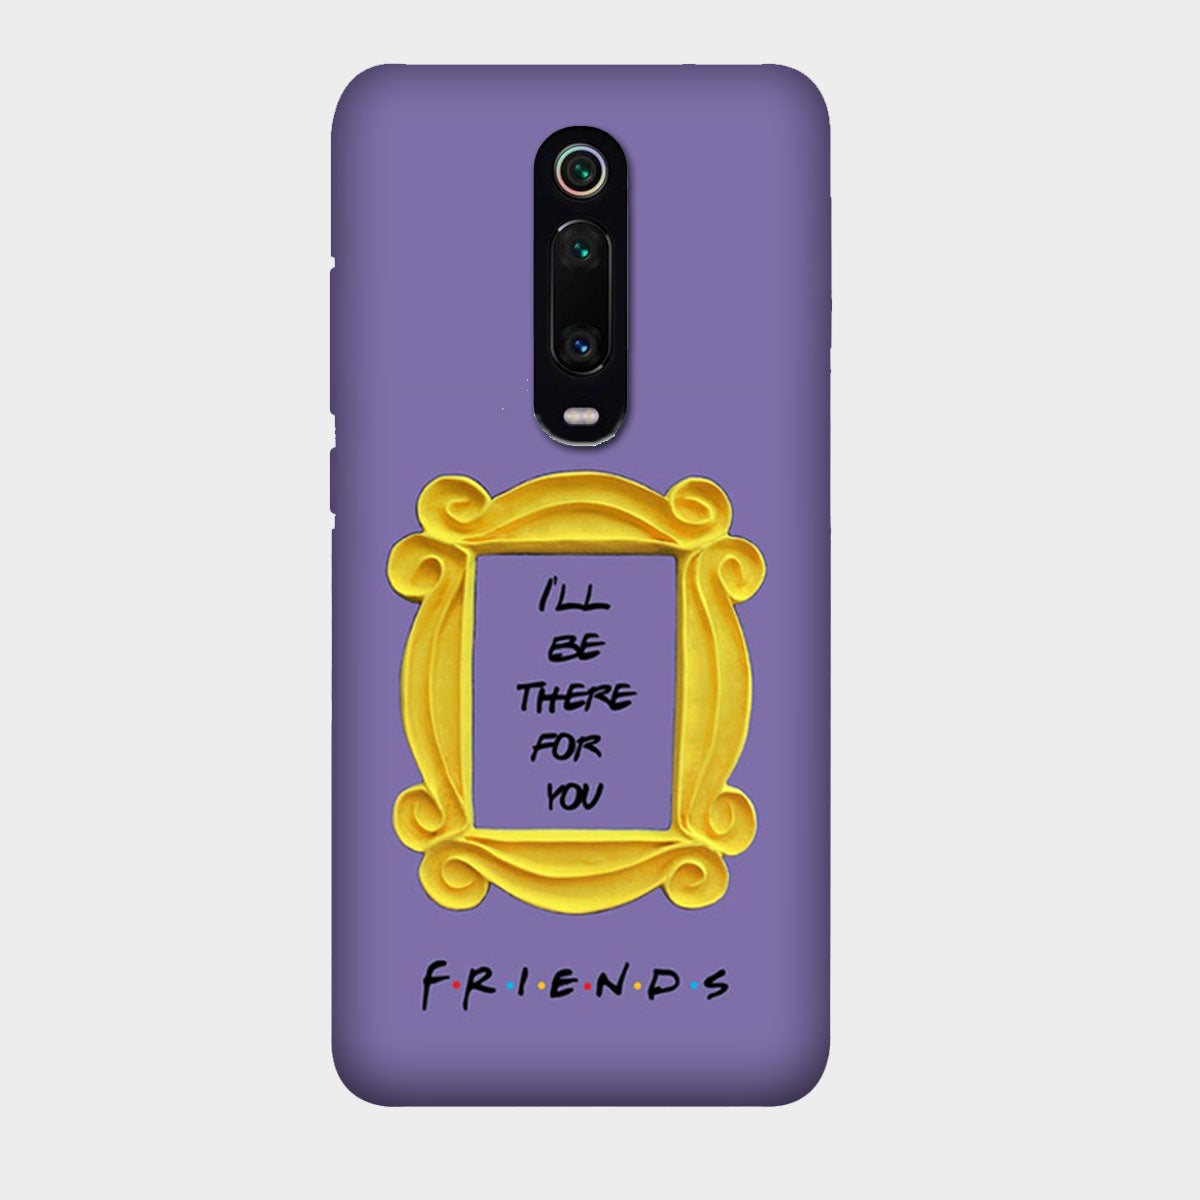 Friends - Frame - I'll be There for You - Mobile Phone Cover - Hard Case